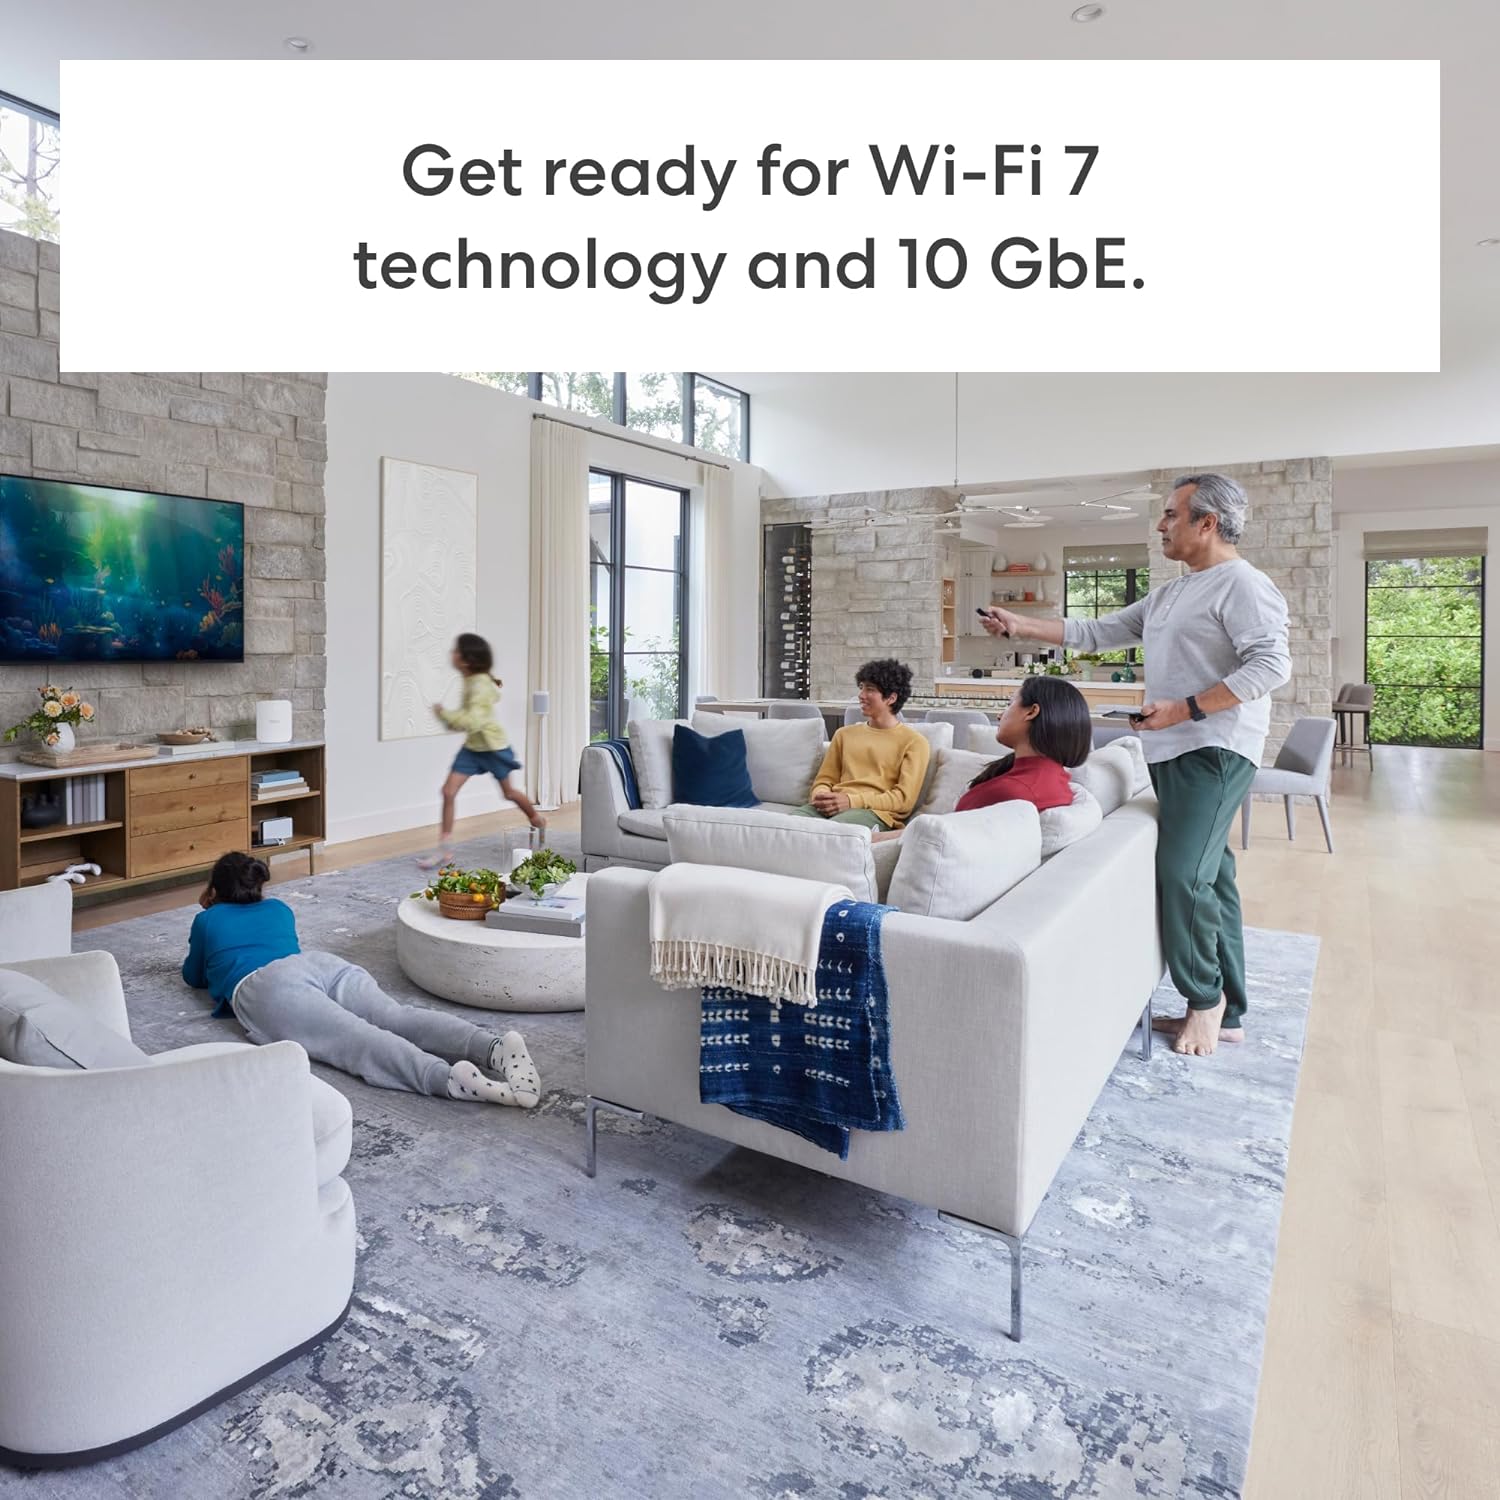 Left View: eero - Max 7 BE20800 Tri-Band Mesh Wi-Fi 7 Router - White